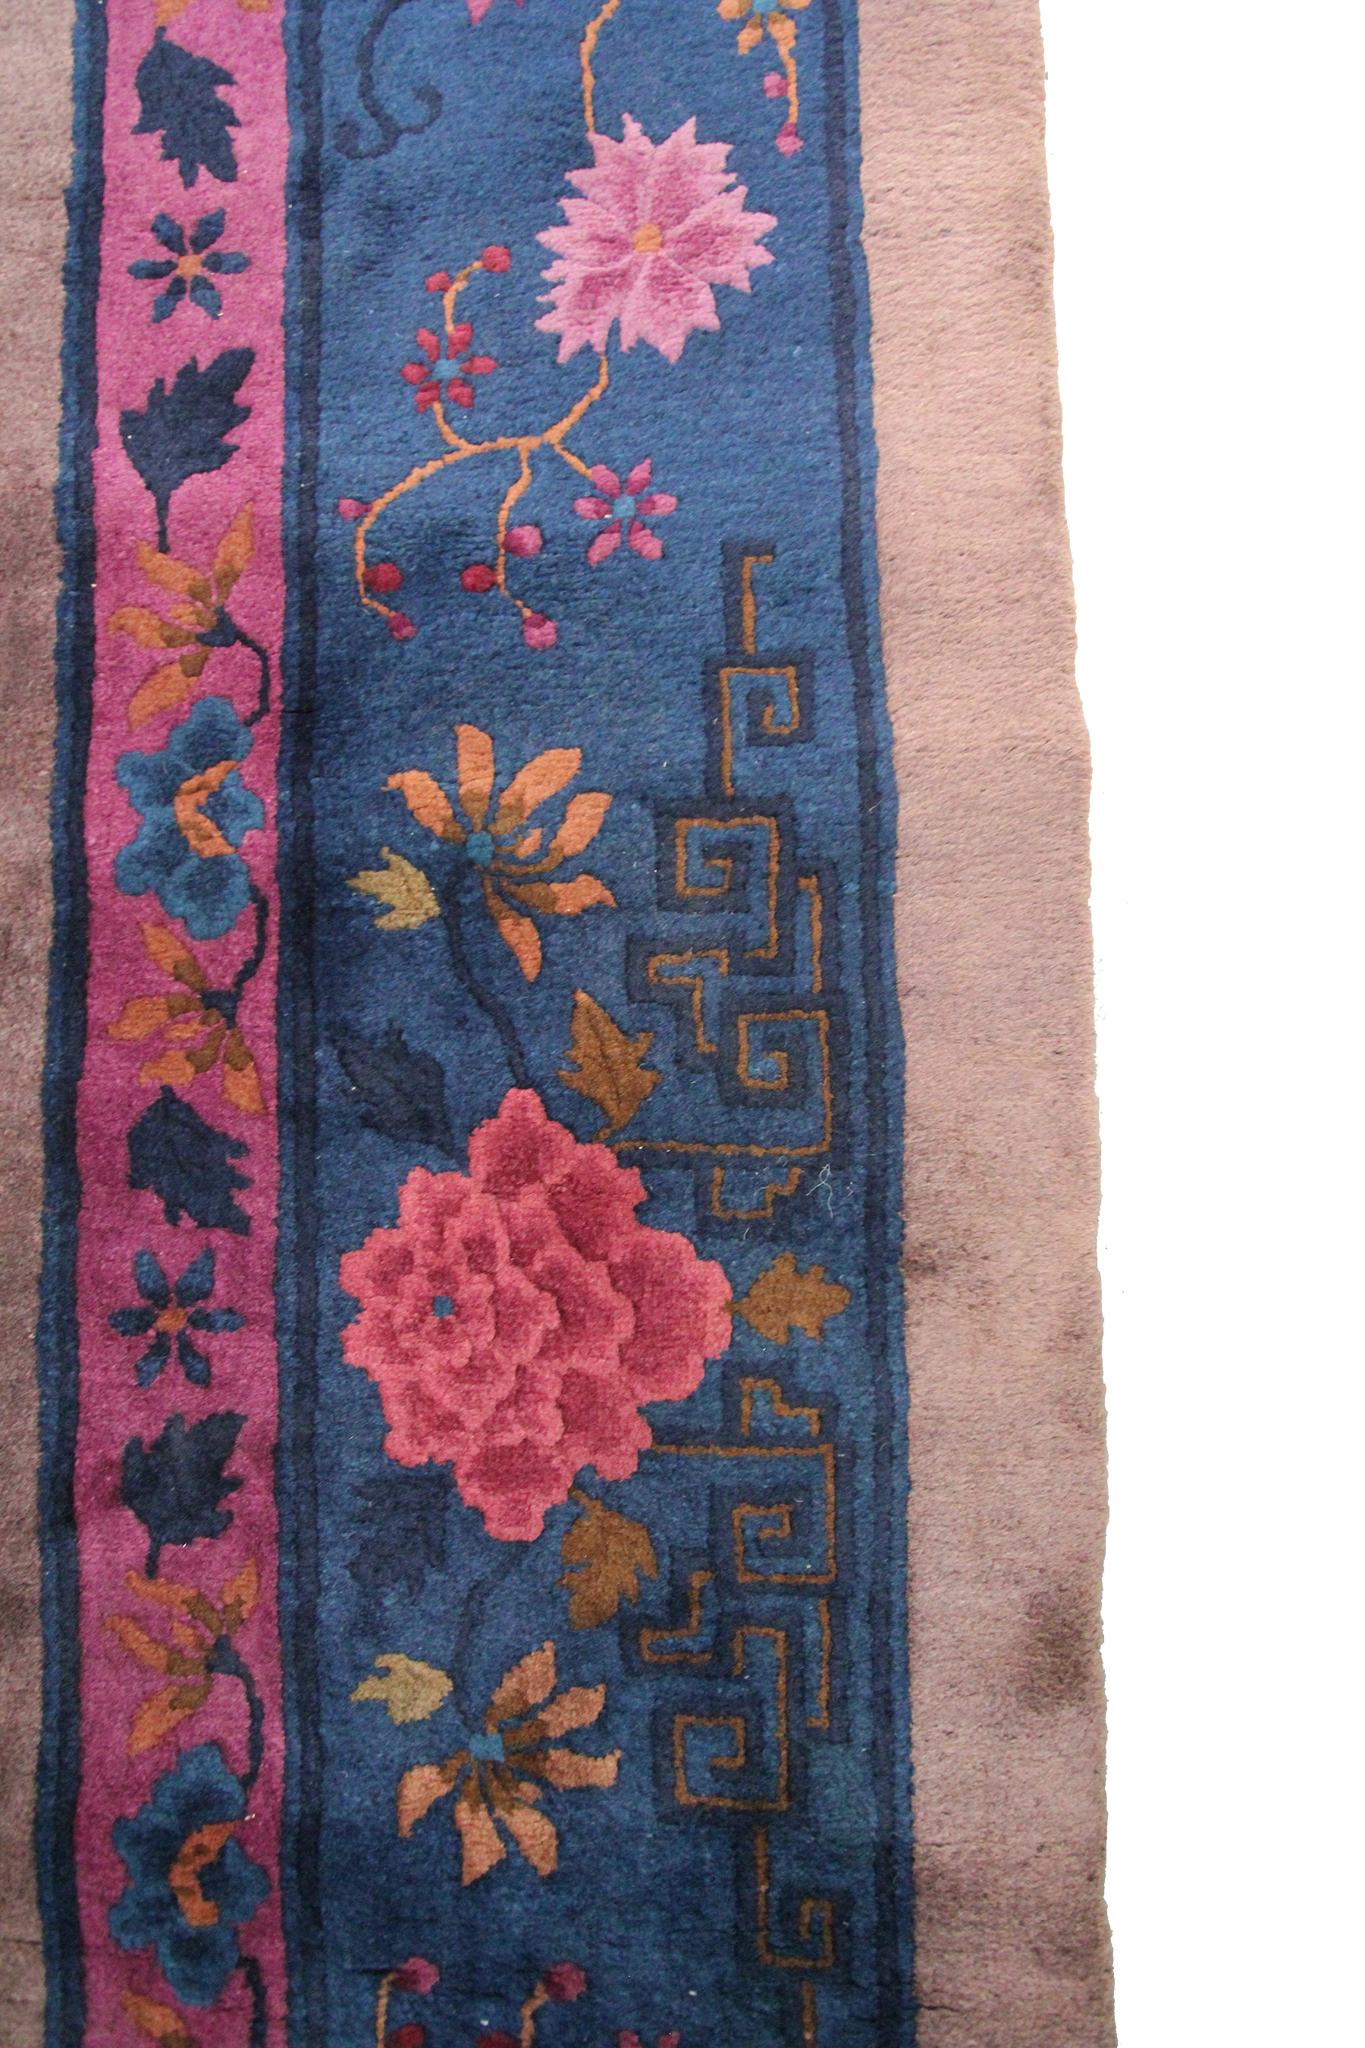 Early 20th Century Antique Art Deco Rug Antique Chinese Walter Nichols Rug 1920 9x12 275cm x 361cm  For Sale